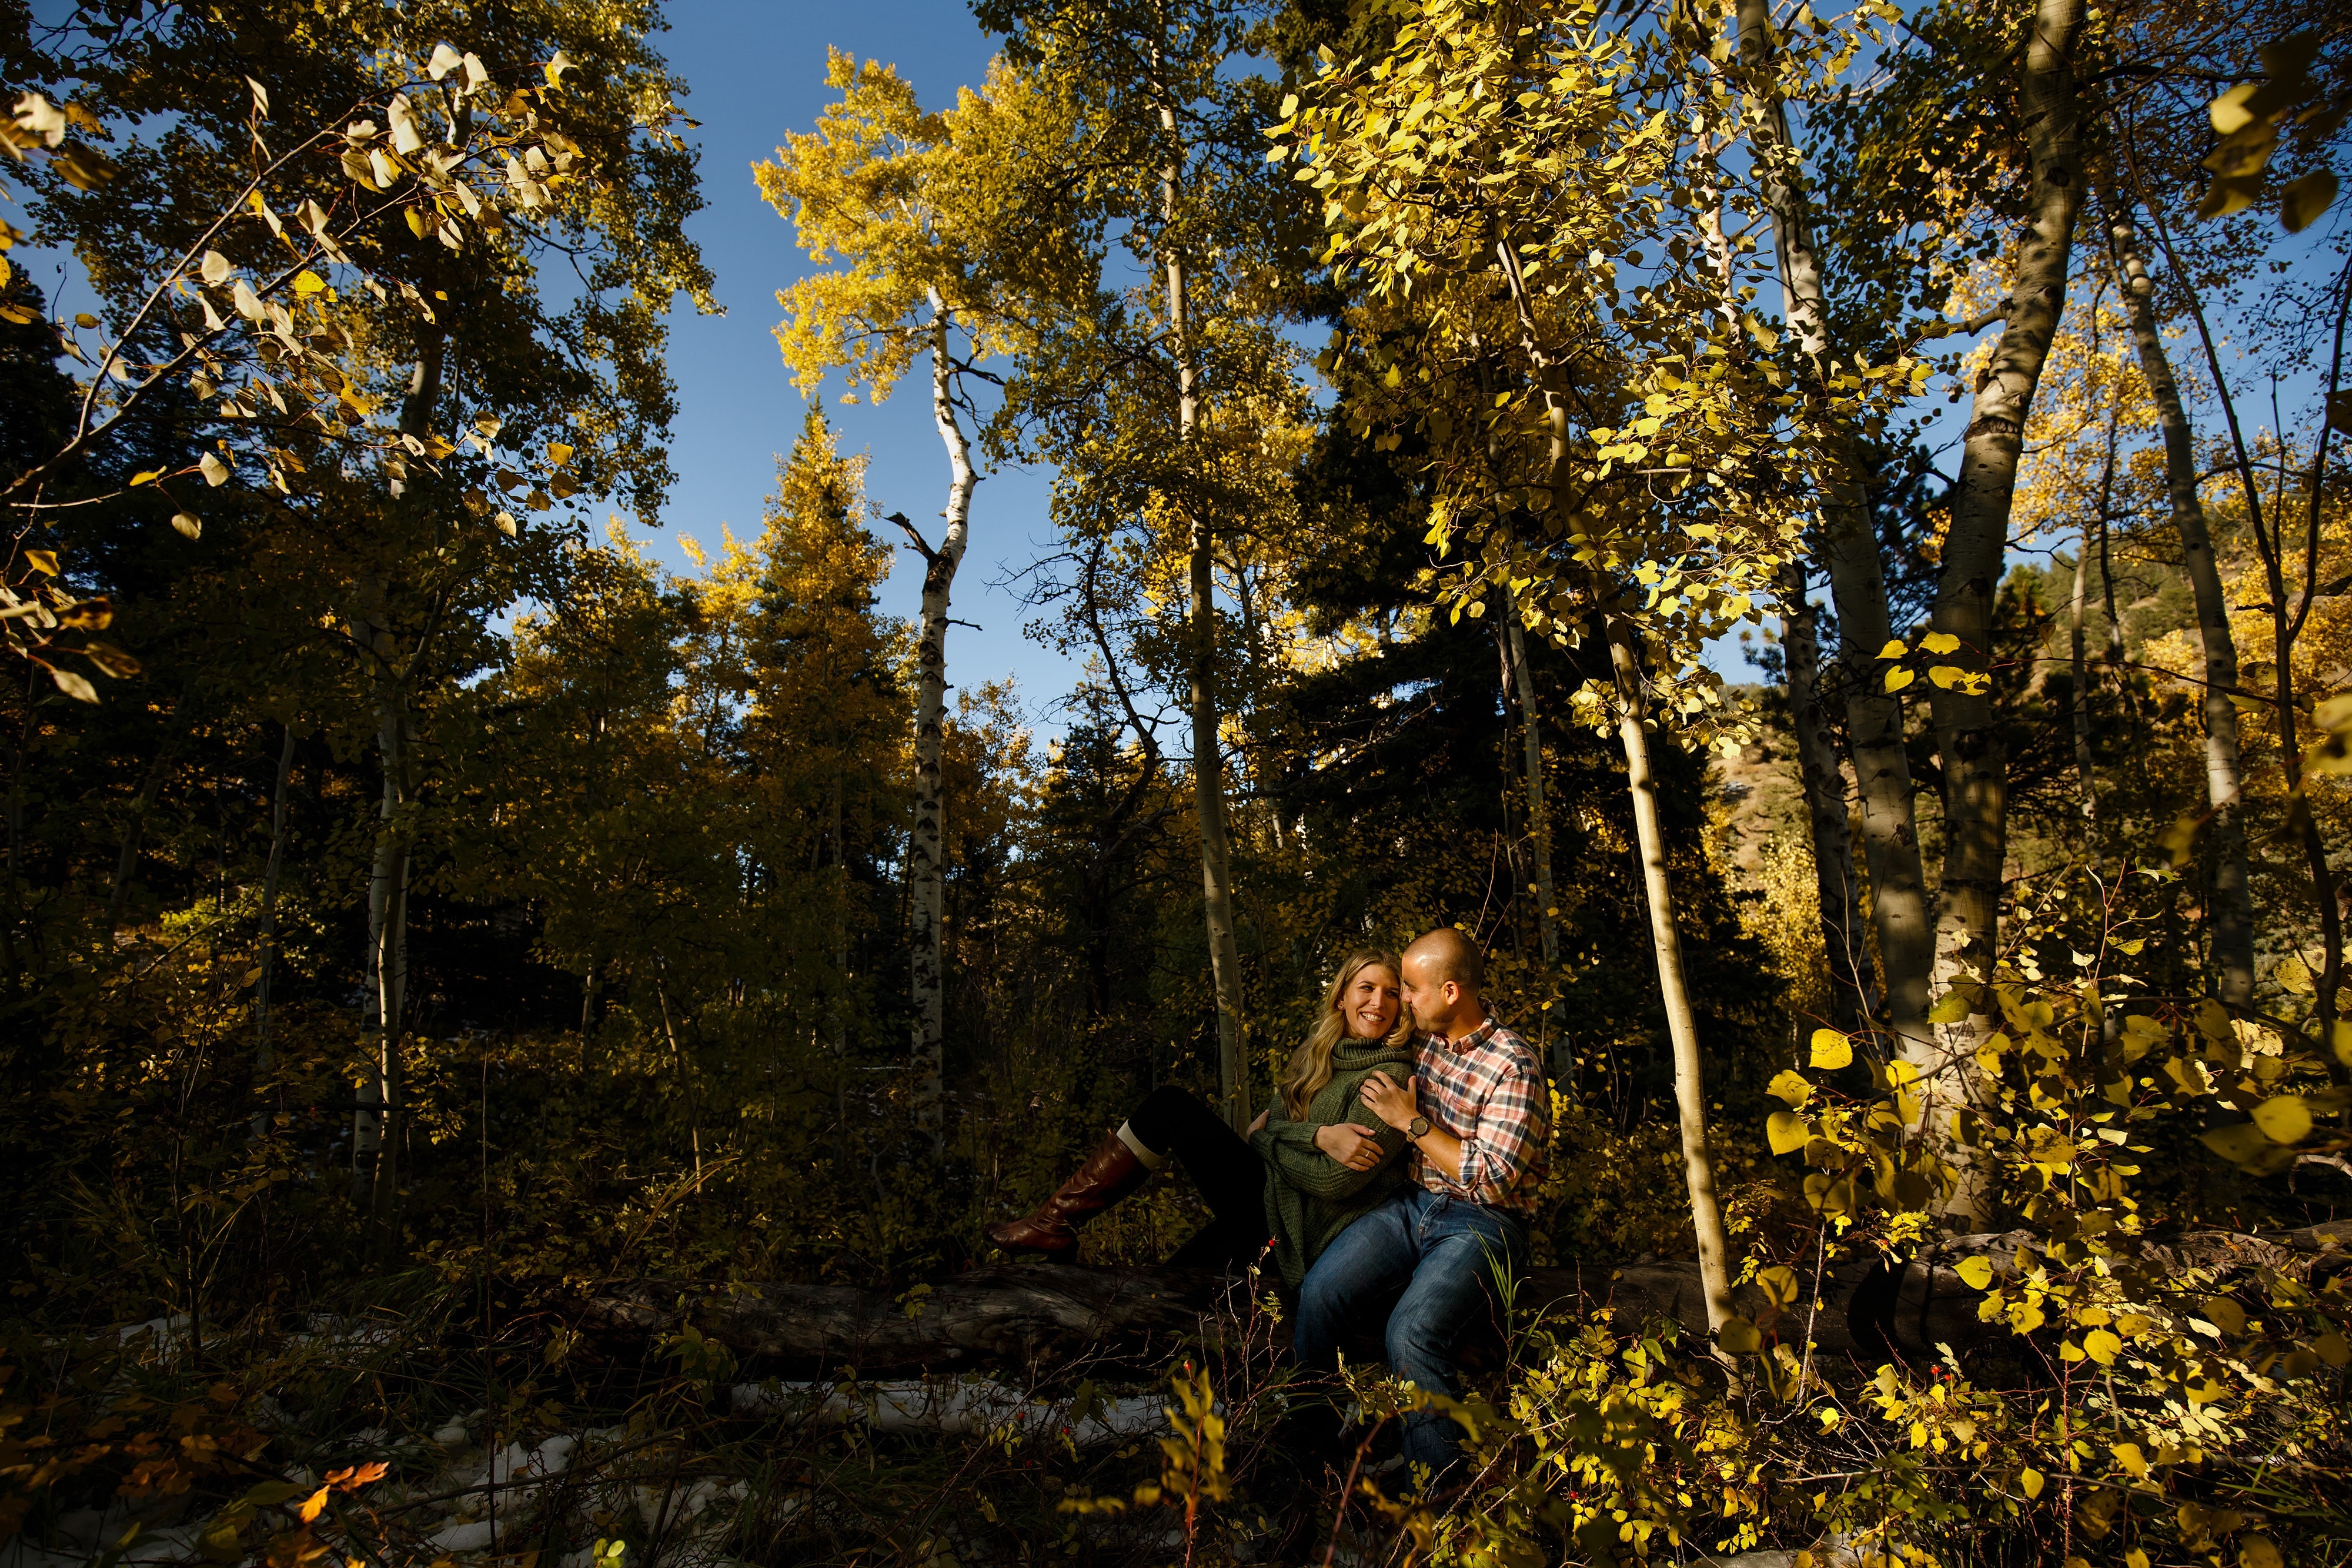 The couple cuddles on a log during their fall Golden Gate Canyon State Park engagement session